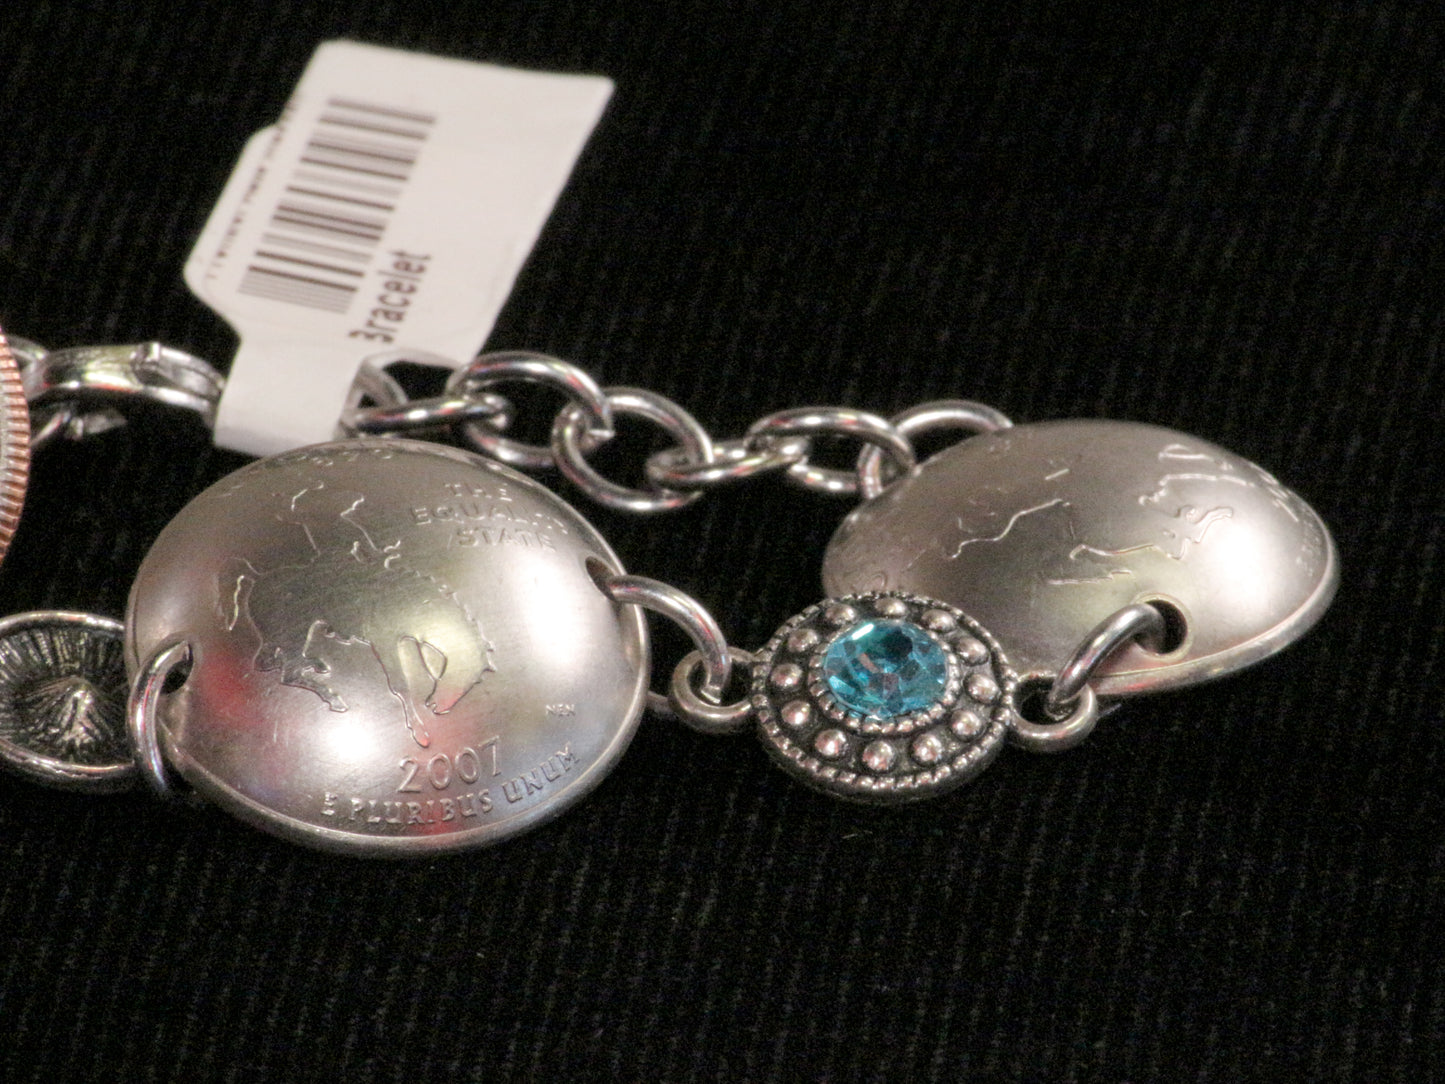 Bracelet with 3 Wyoming Quarters and two light blue and silvertone beads